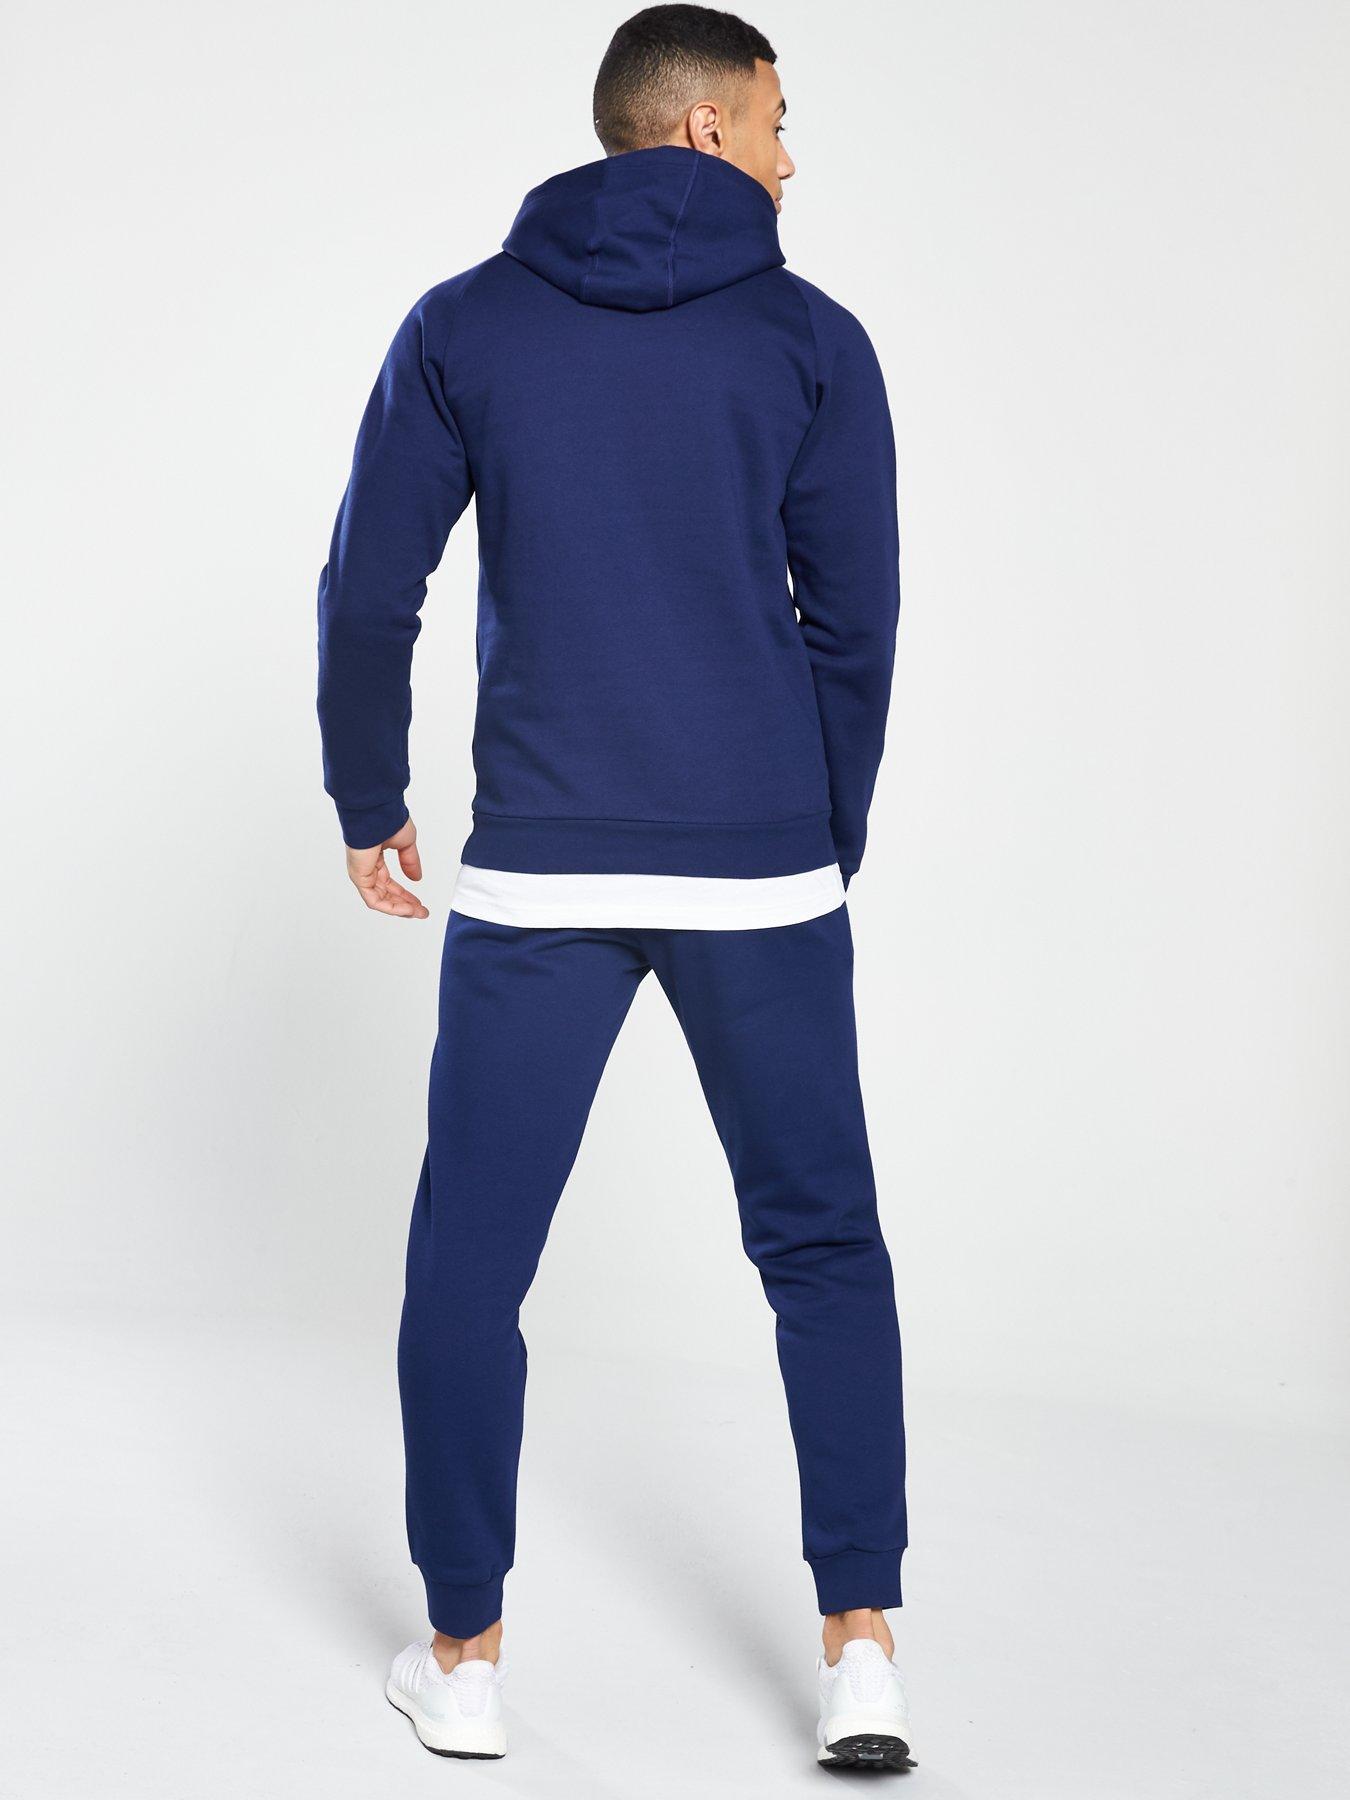 Adidas Mens Core 18 Sweat Hooded Tracksuit